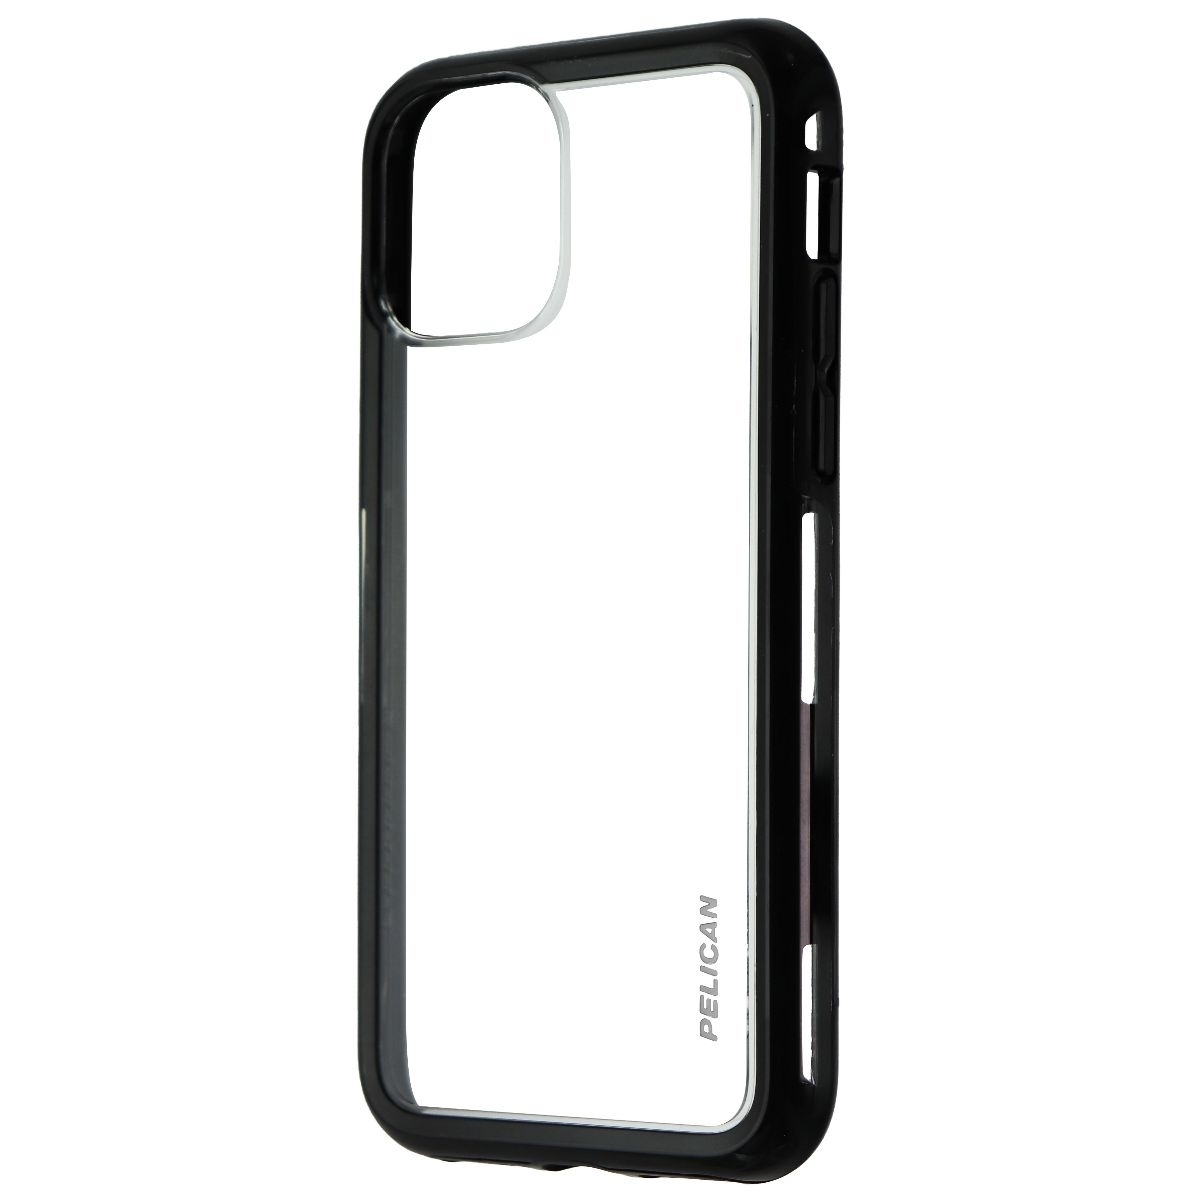 Pelican Adventurer Series Protective Case For Apple IPhone 11 Pro - Clear/Black